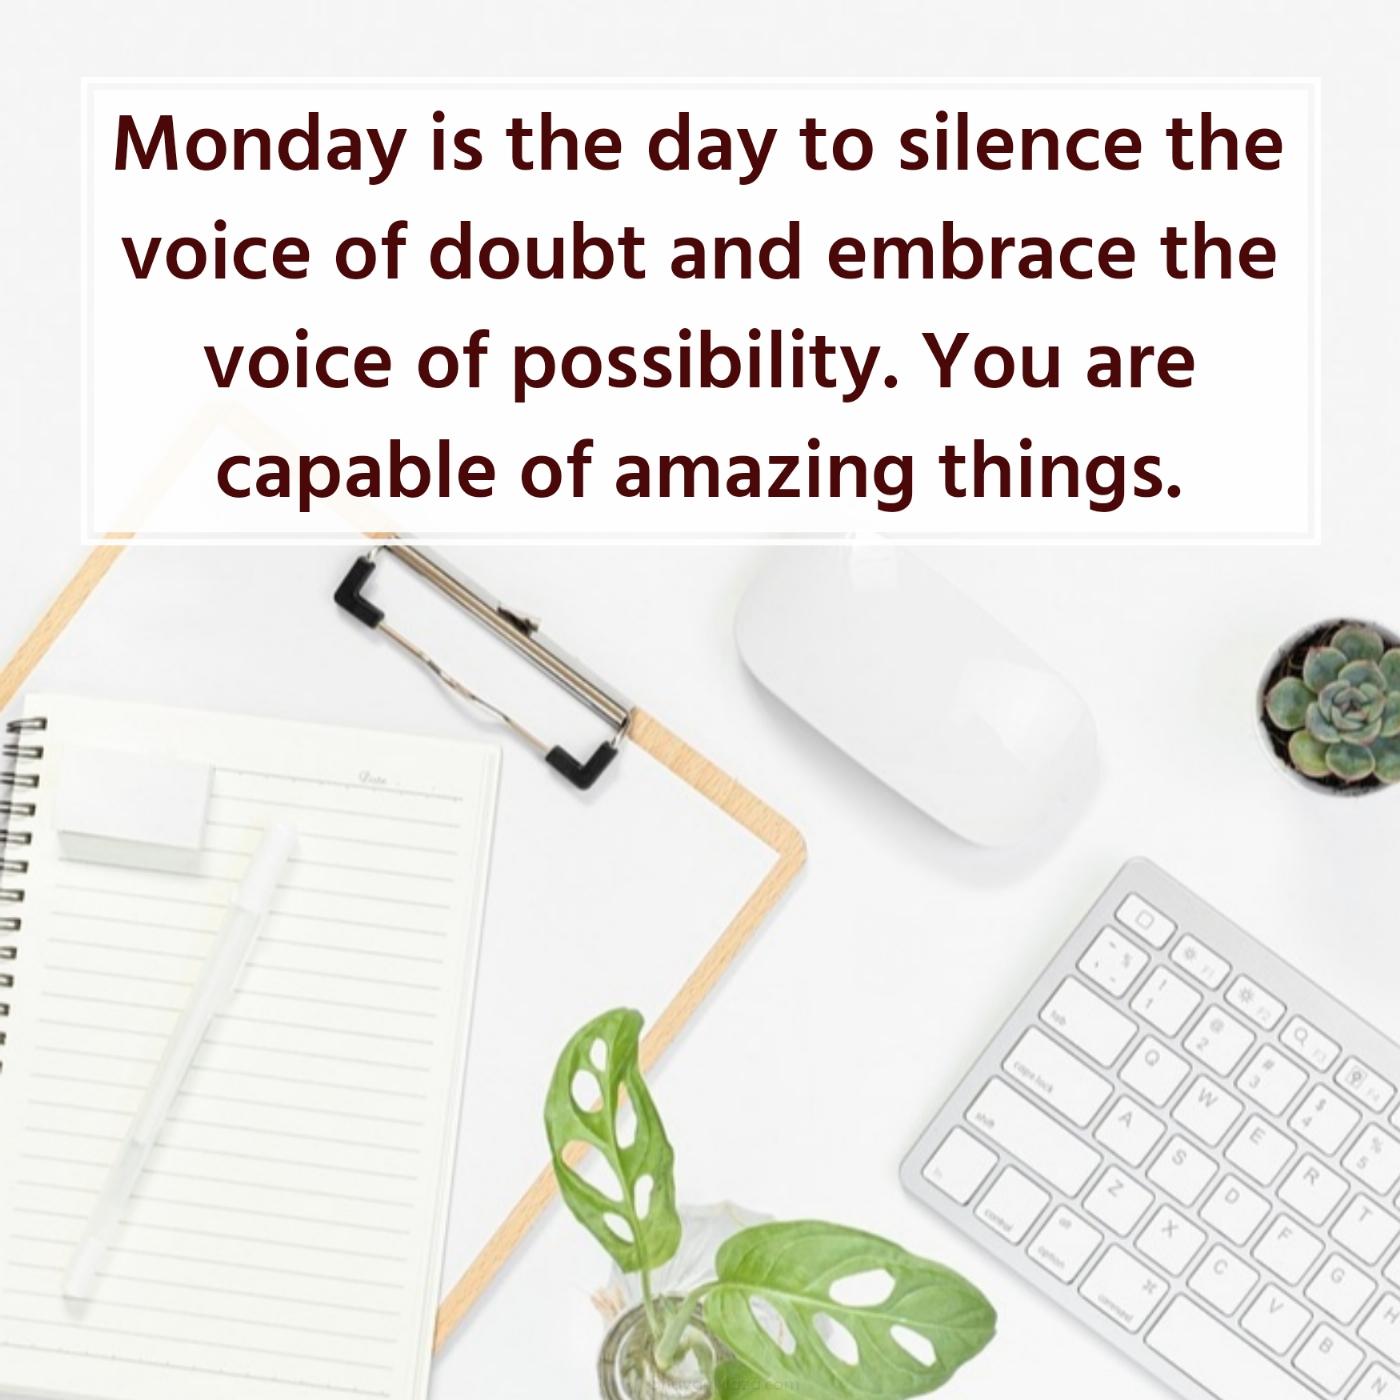 Monday is the day to silence the voice of doubt